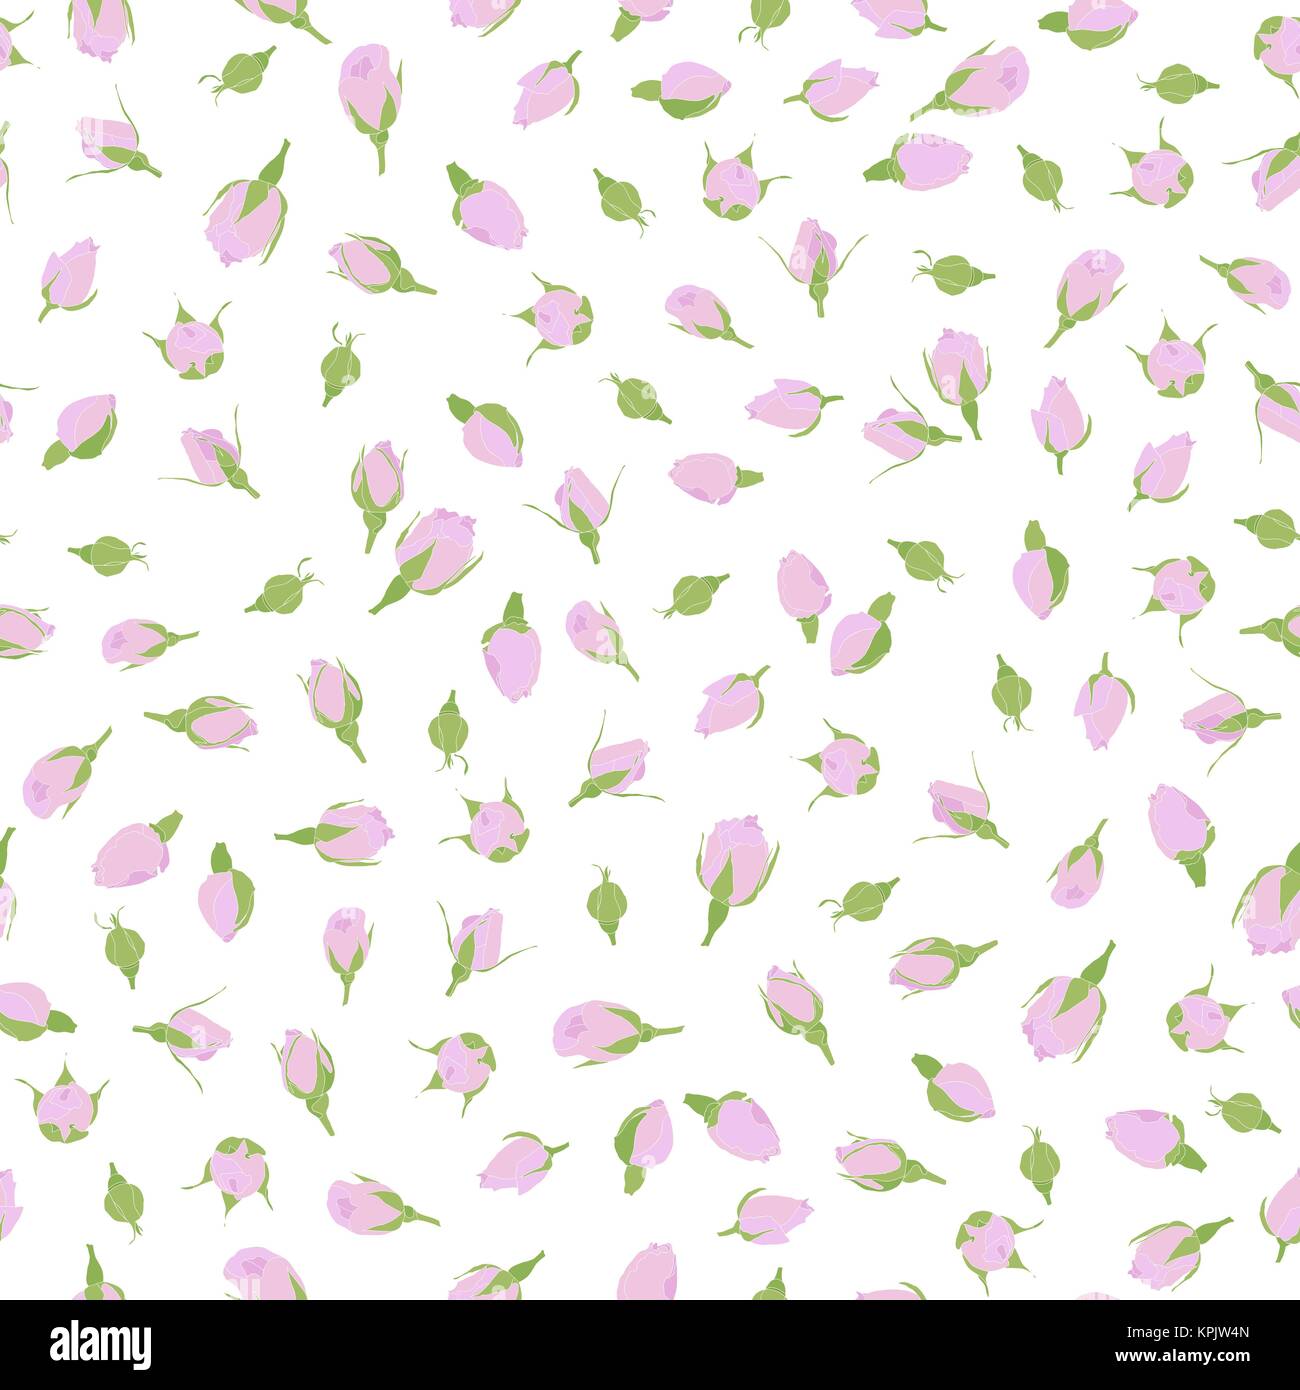 Pink rosebuds seamless pattern romantic theme floral ornament small rose flowers on the white background for web site decoration wallpaper or pat stock vector image art